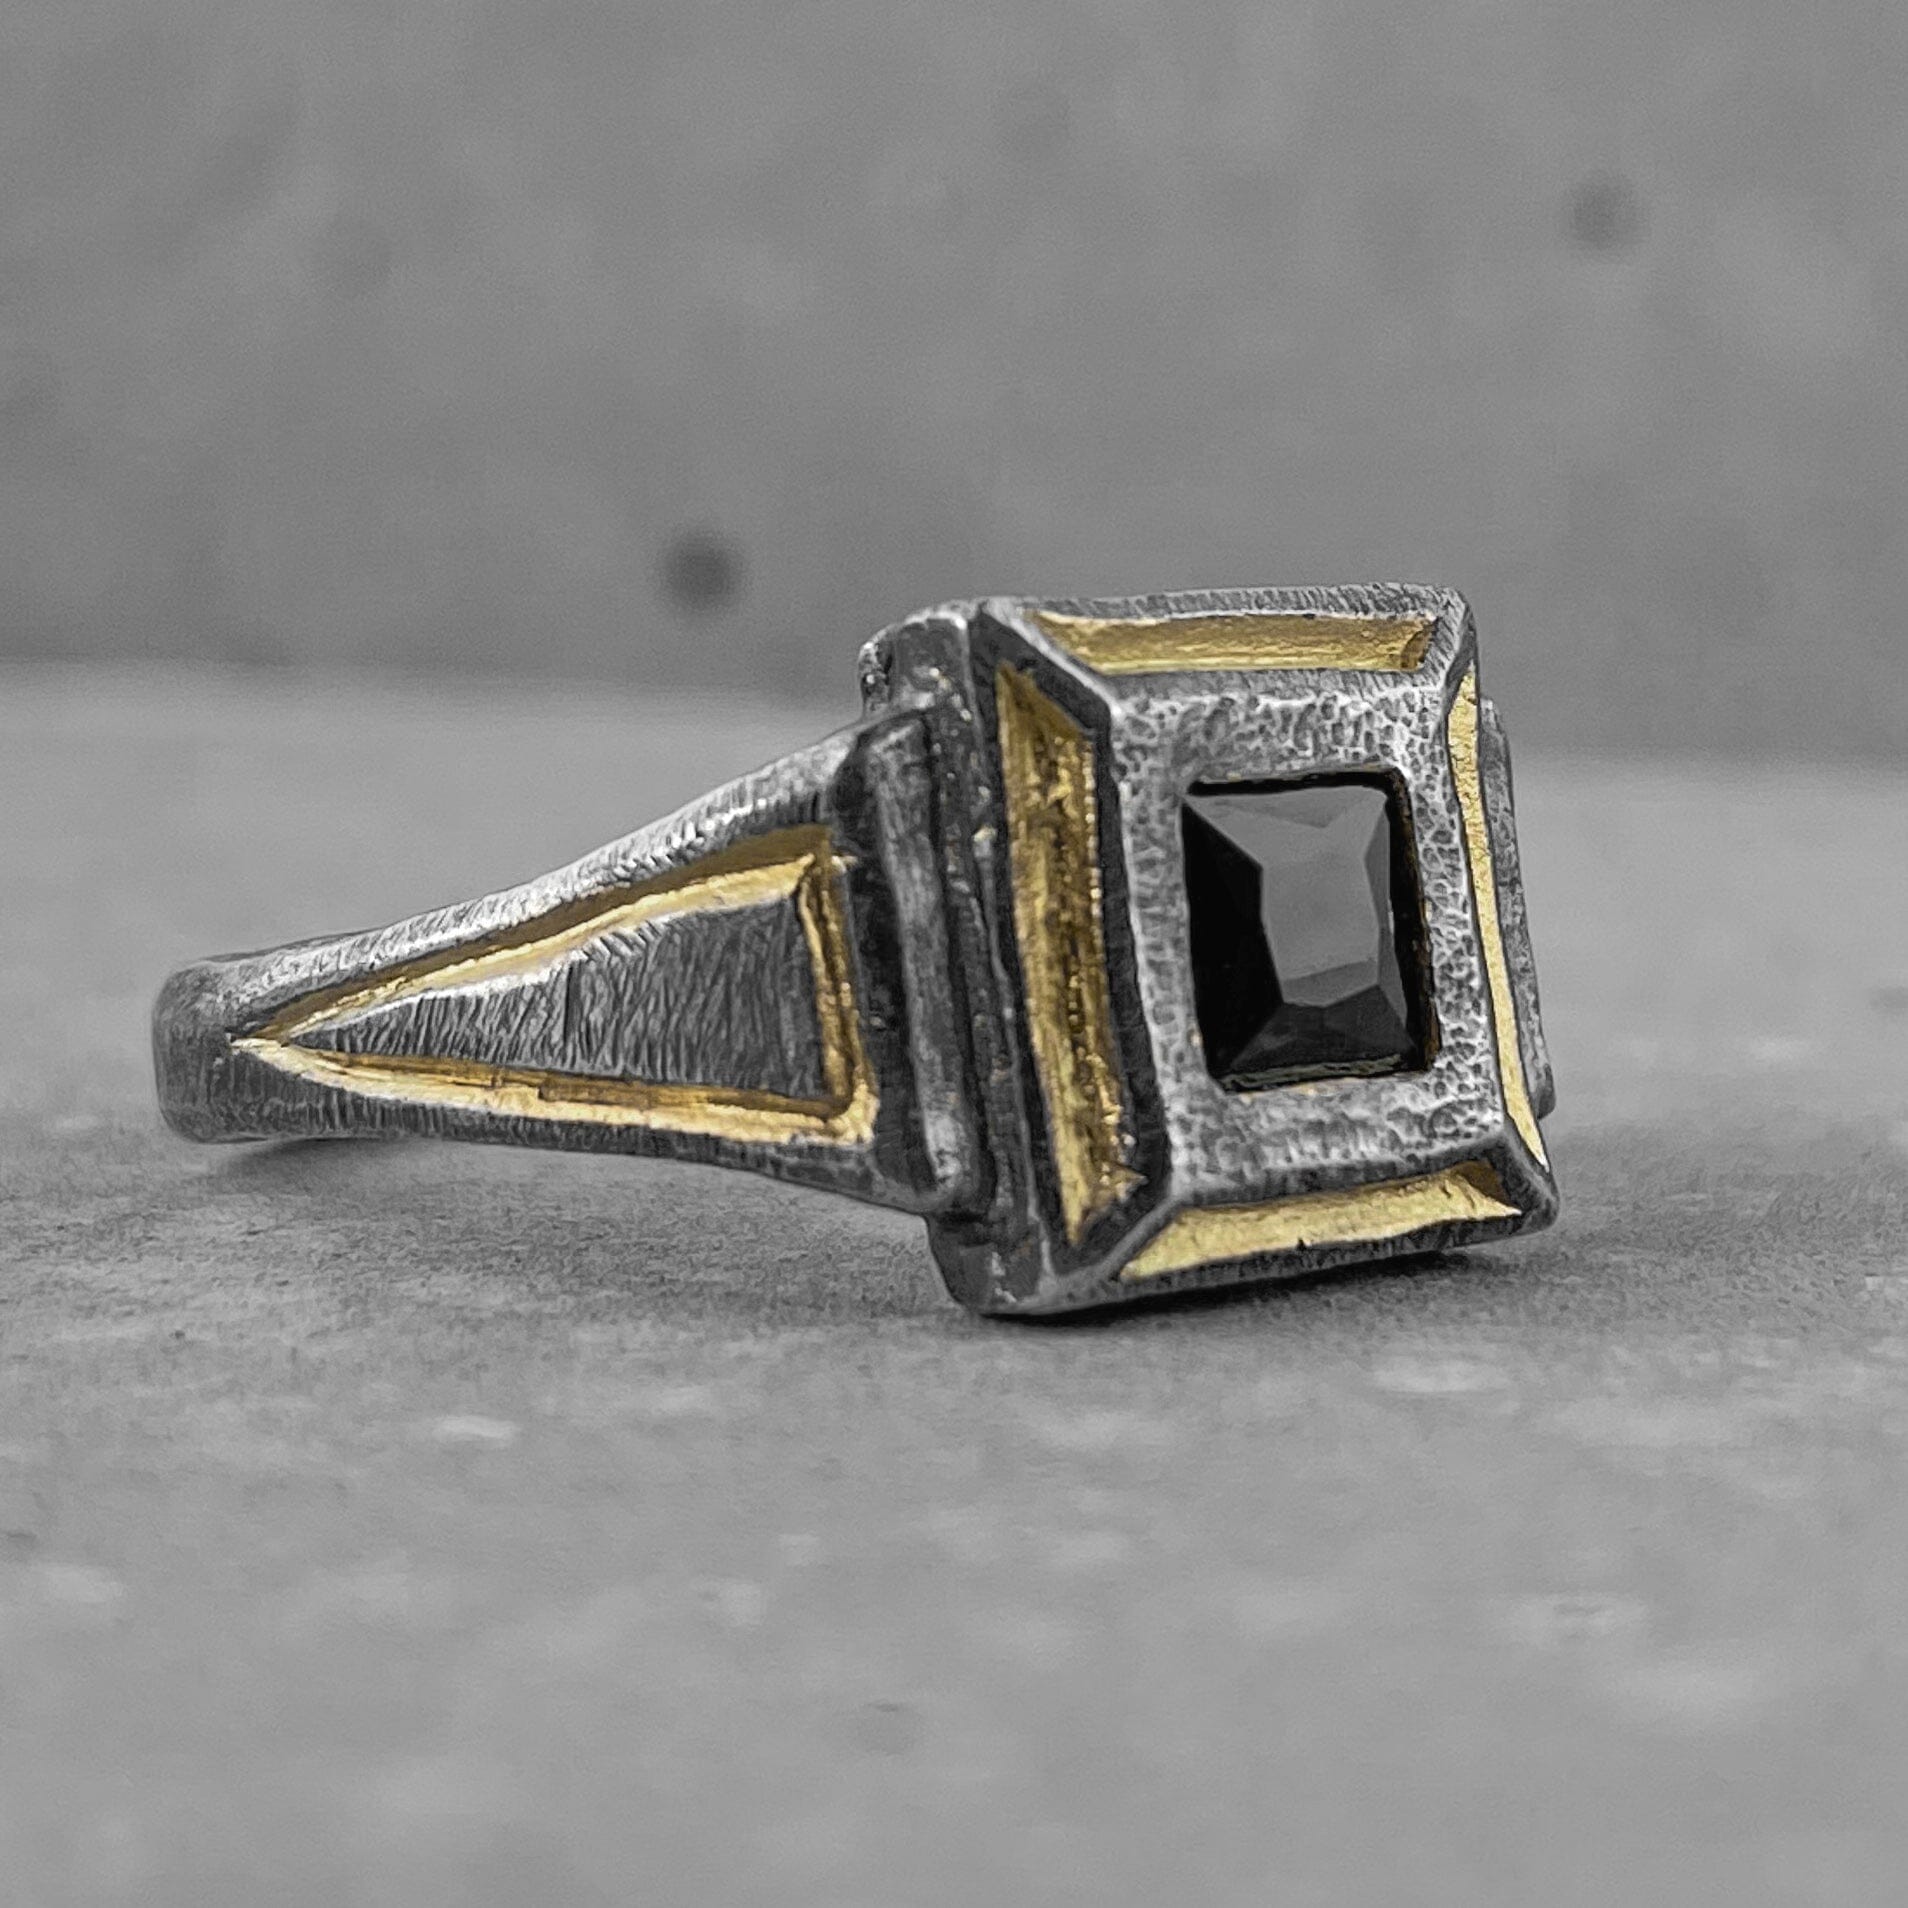 The Renaissance ring- a square signet ring with a large black stone and gold plated elements in the composition. Black diamonds rings Project50g 